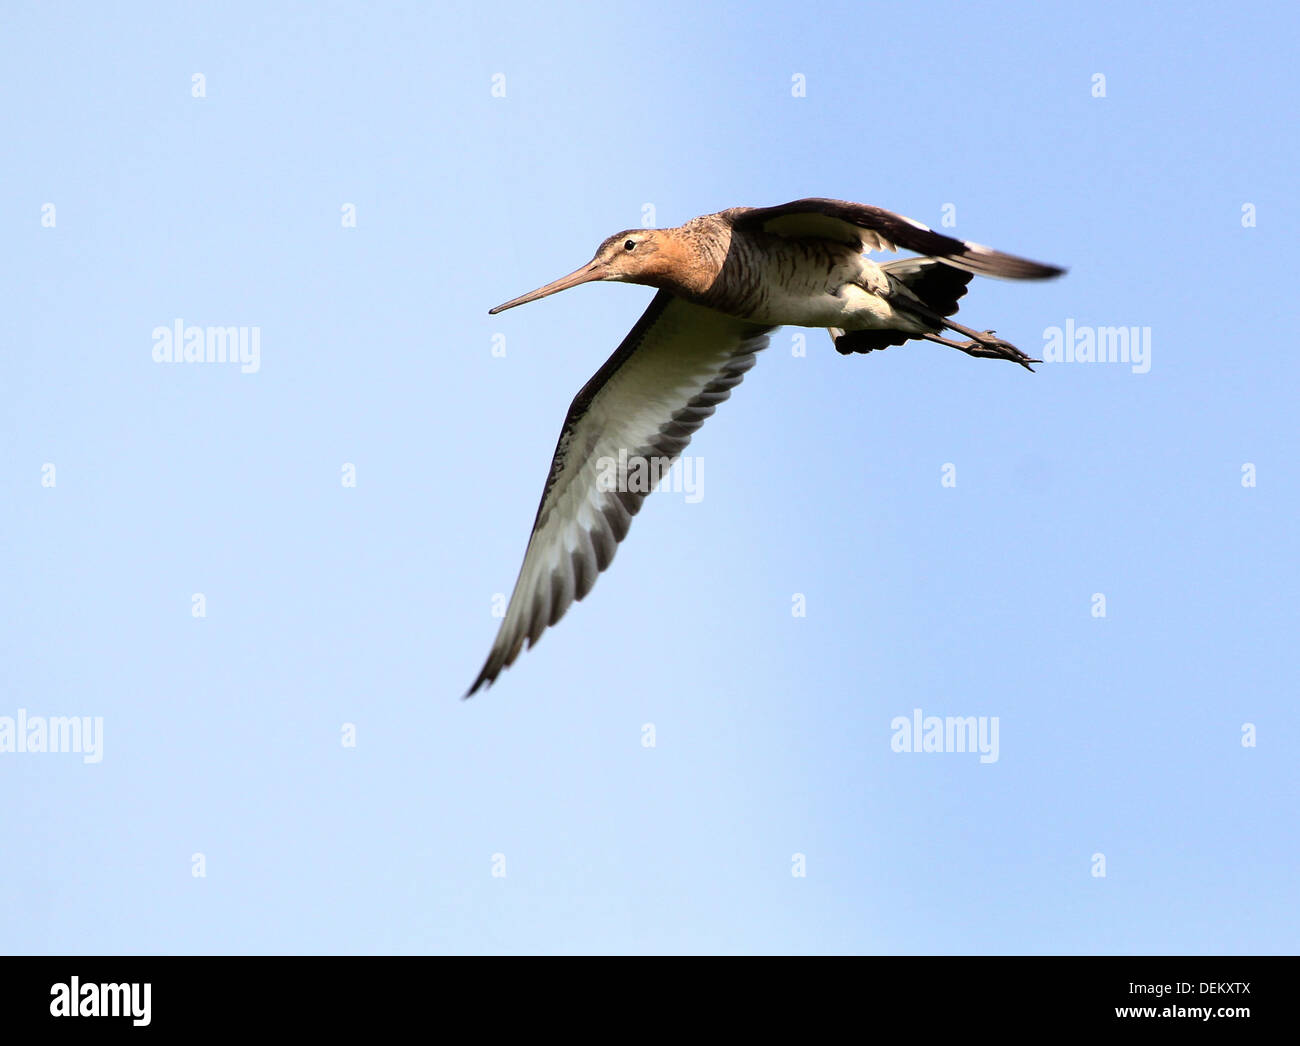 Detailed close-up of a Black-tailed Godwit (Limosa limosa) in flight Stock Photo